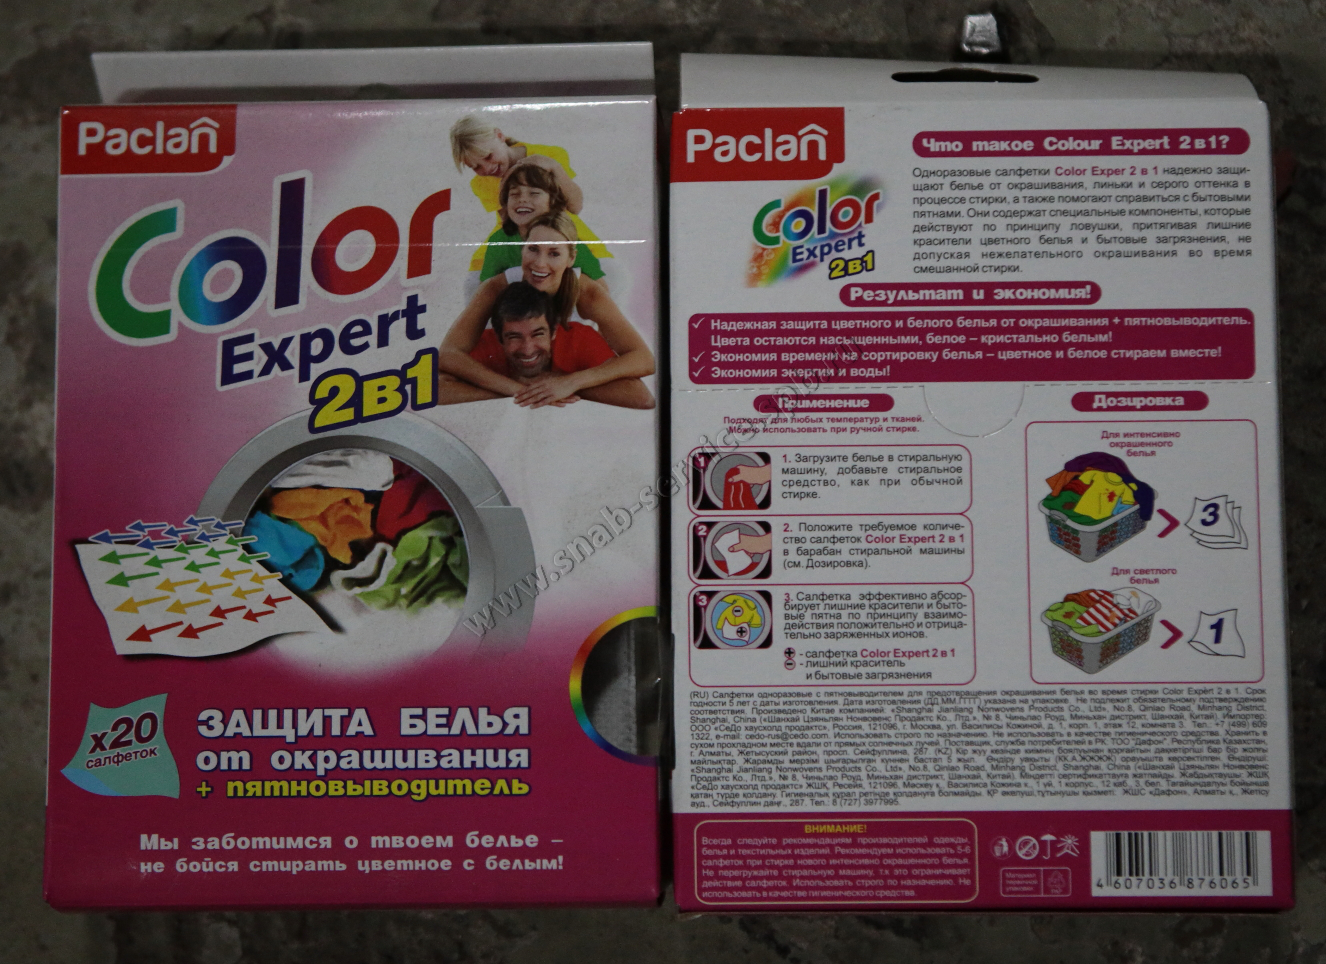  olor Expert 21   20 ./ 410153 50    PACLAN